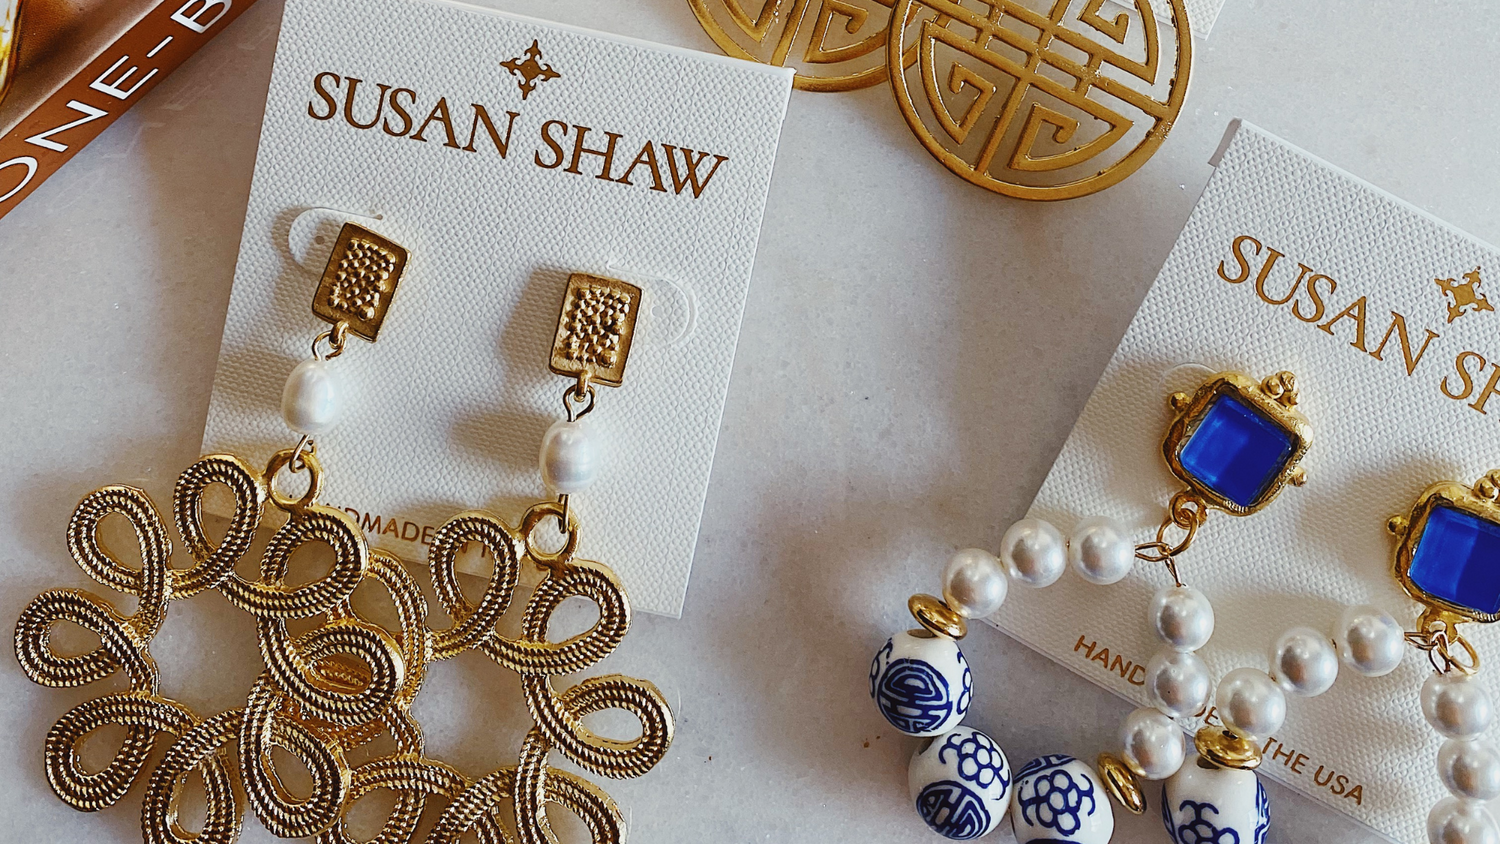 Susan Shaw Collection